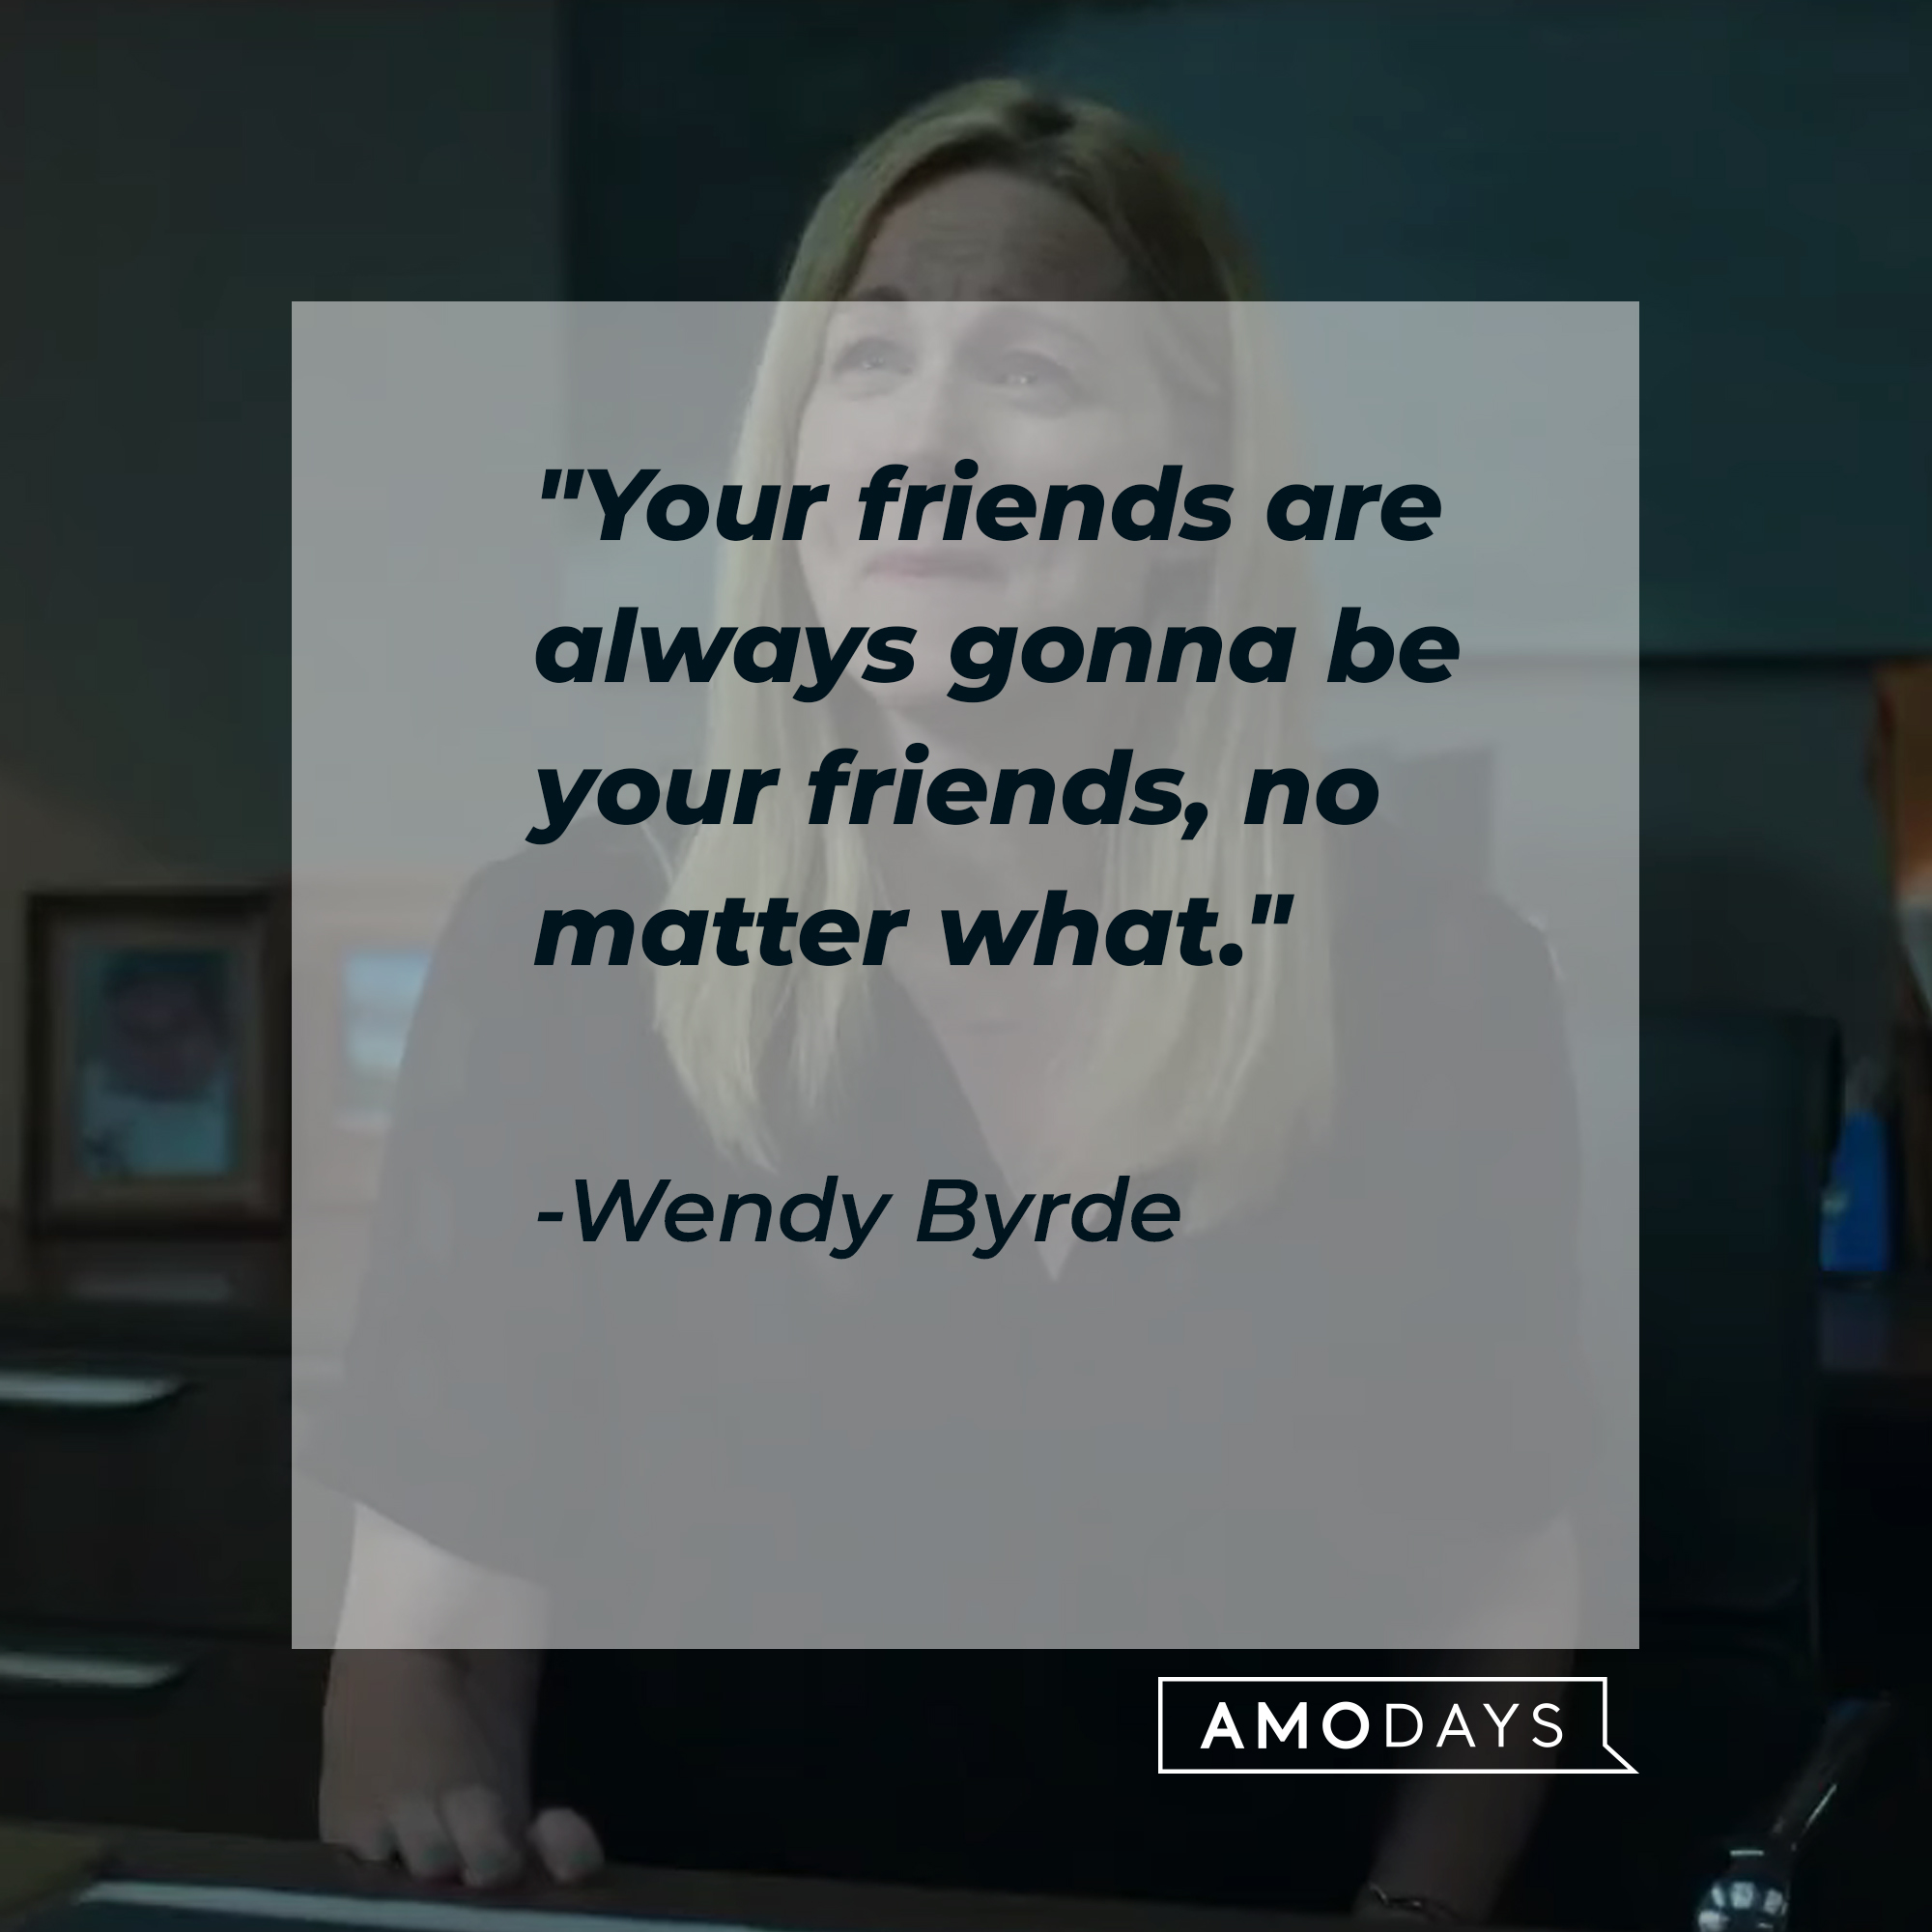 Wendy Byrde’s quote: “Your friends are always gonna be your friends, no matter what.” | Source: facebook.com/OzarkNetflix